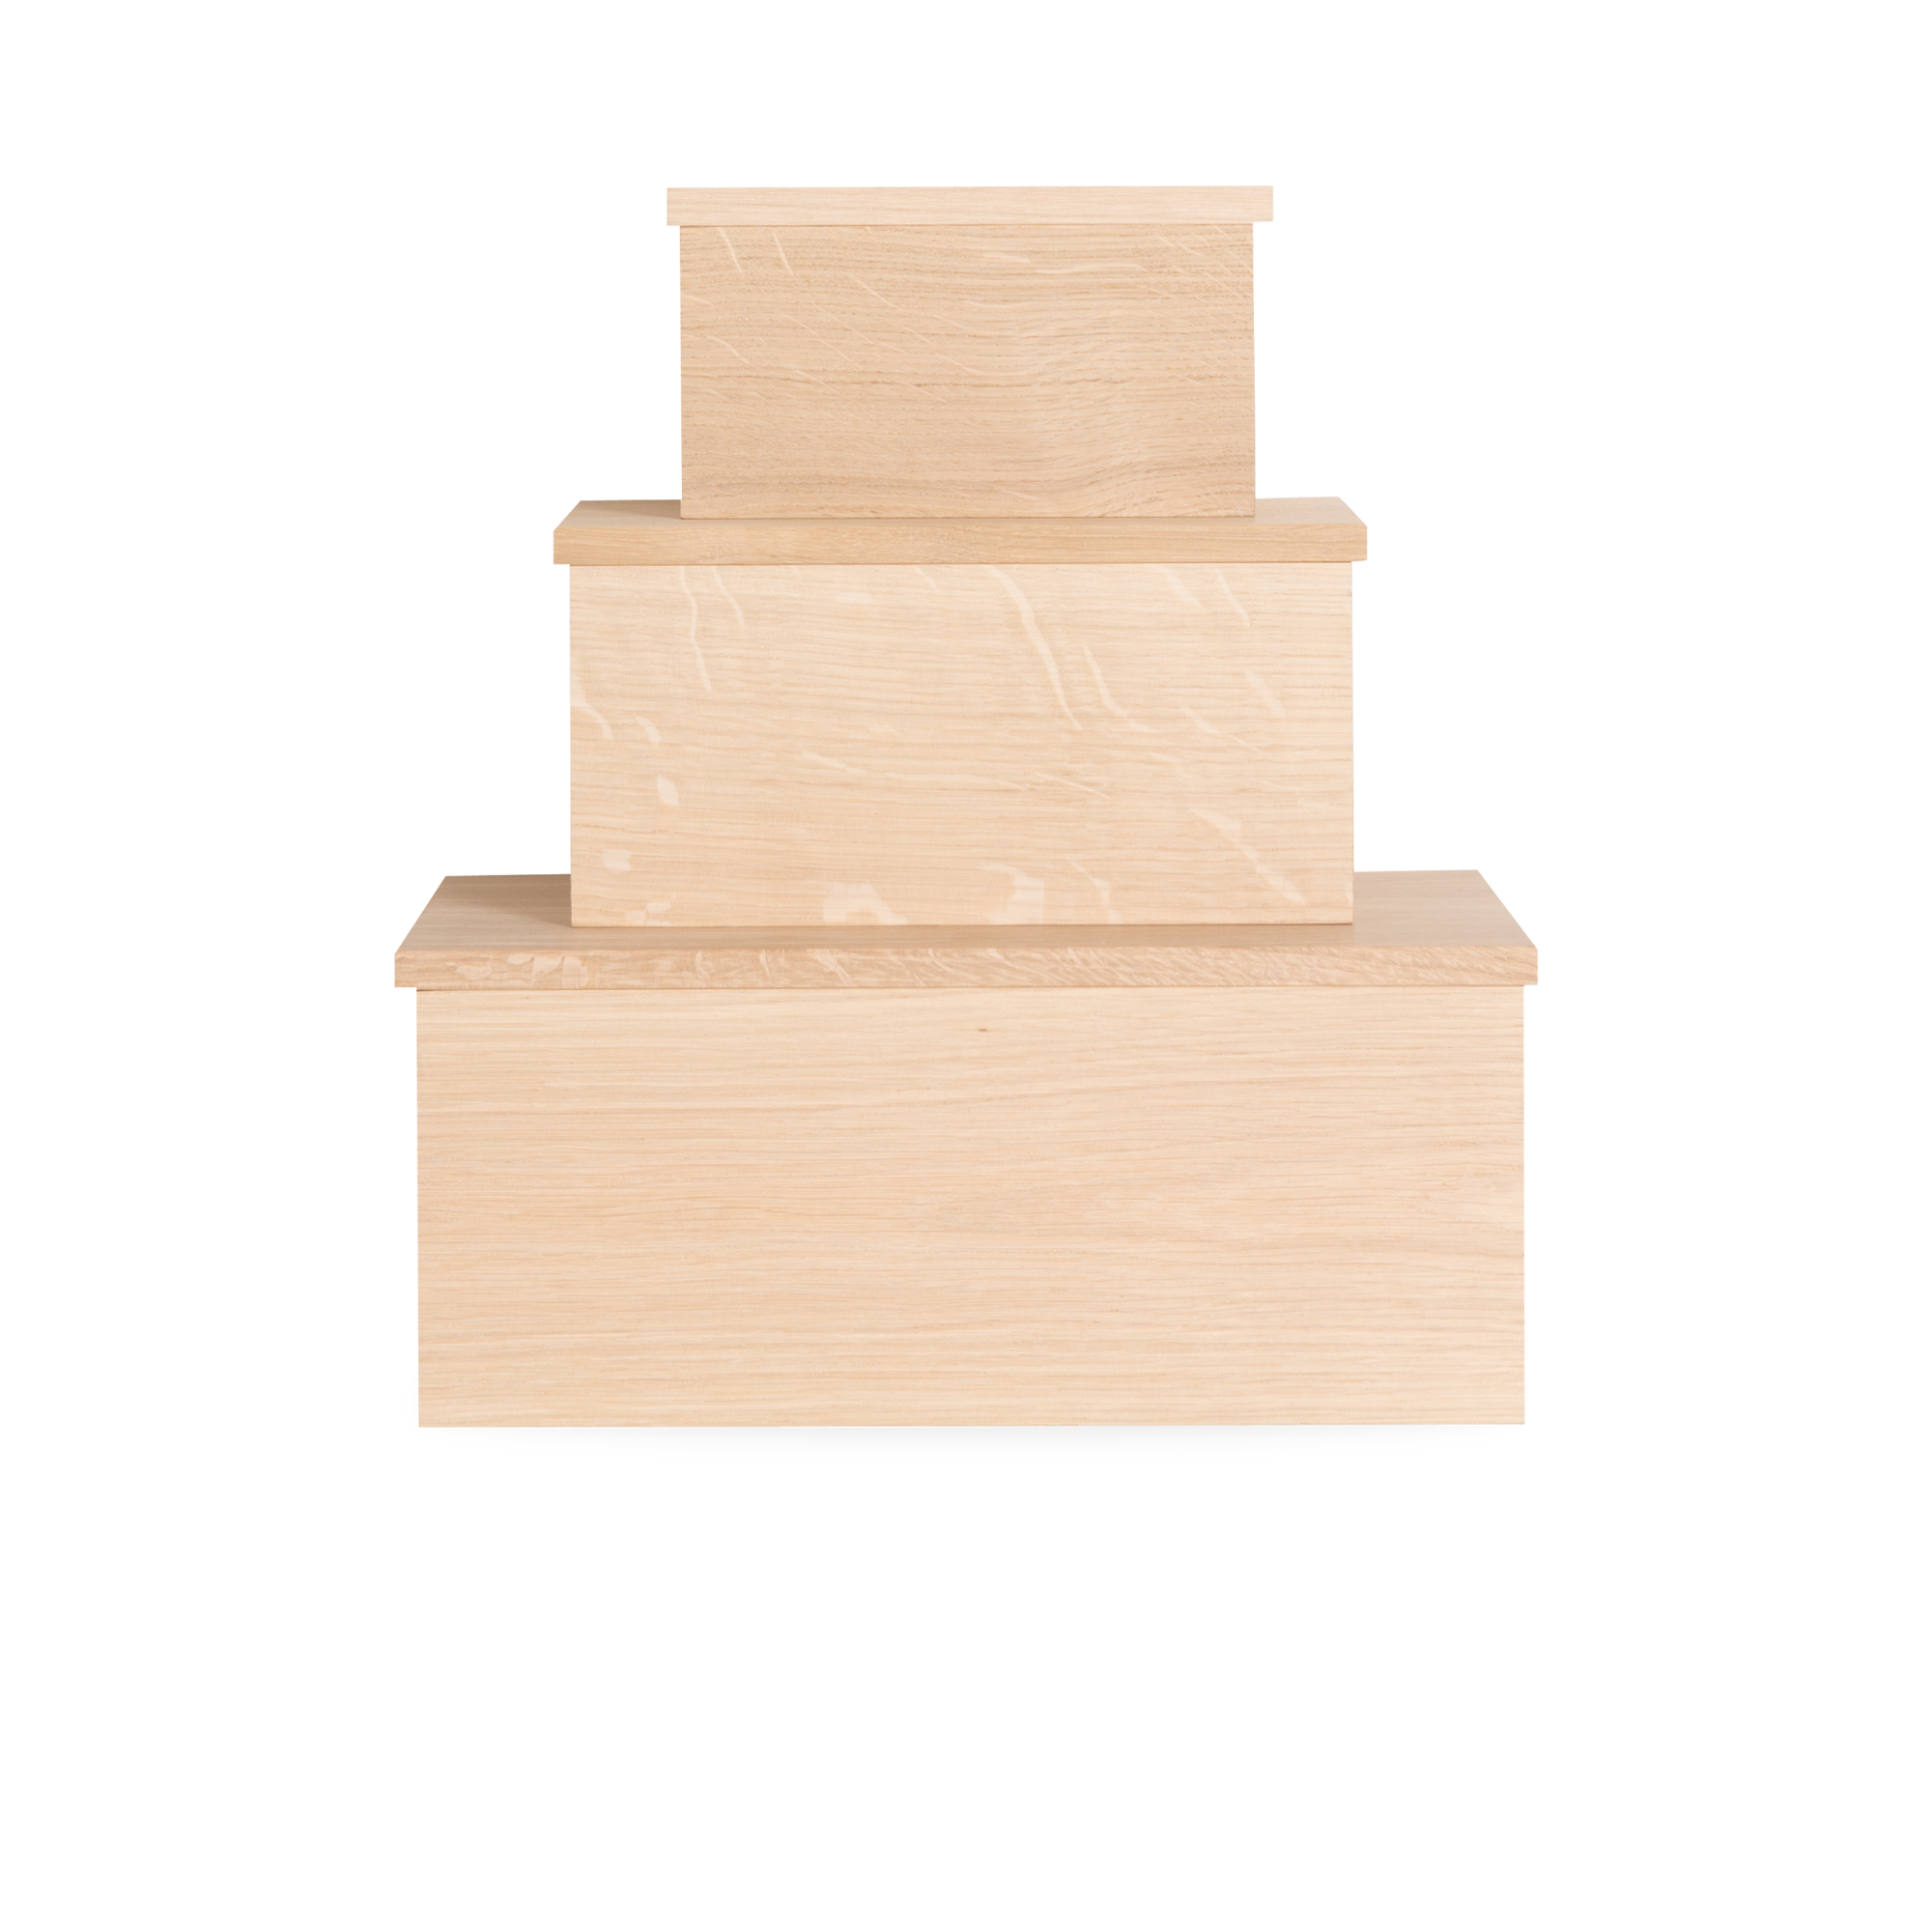 Created with a focus on elegance through simplicity, the Oak Box was carefully crafted using high-quality oak wood from the Black Forest in Germany.